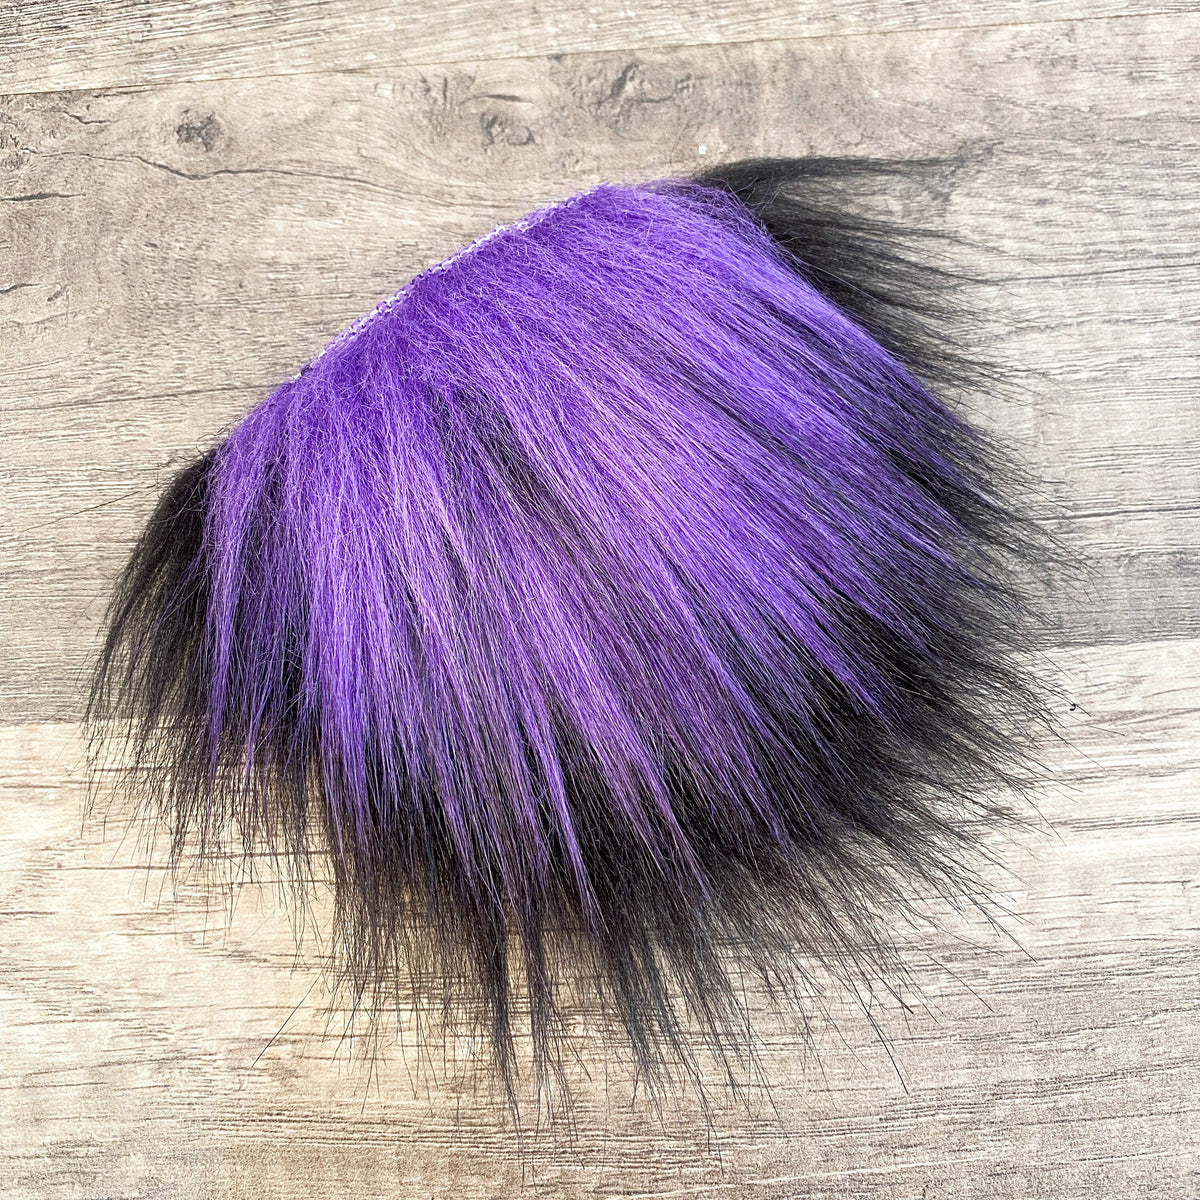 Two Piece Layered Gnome Beard - Black-Tipped Purple Over Straight Black